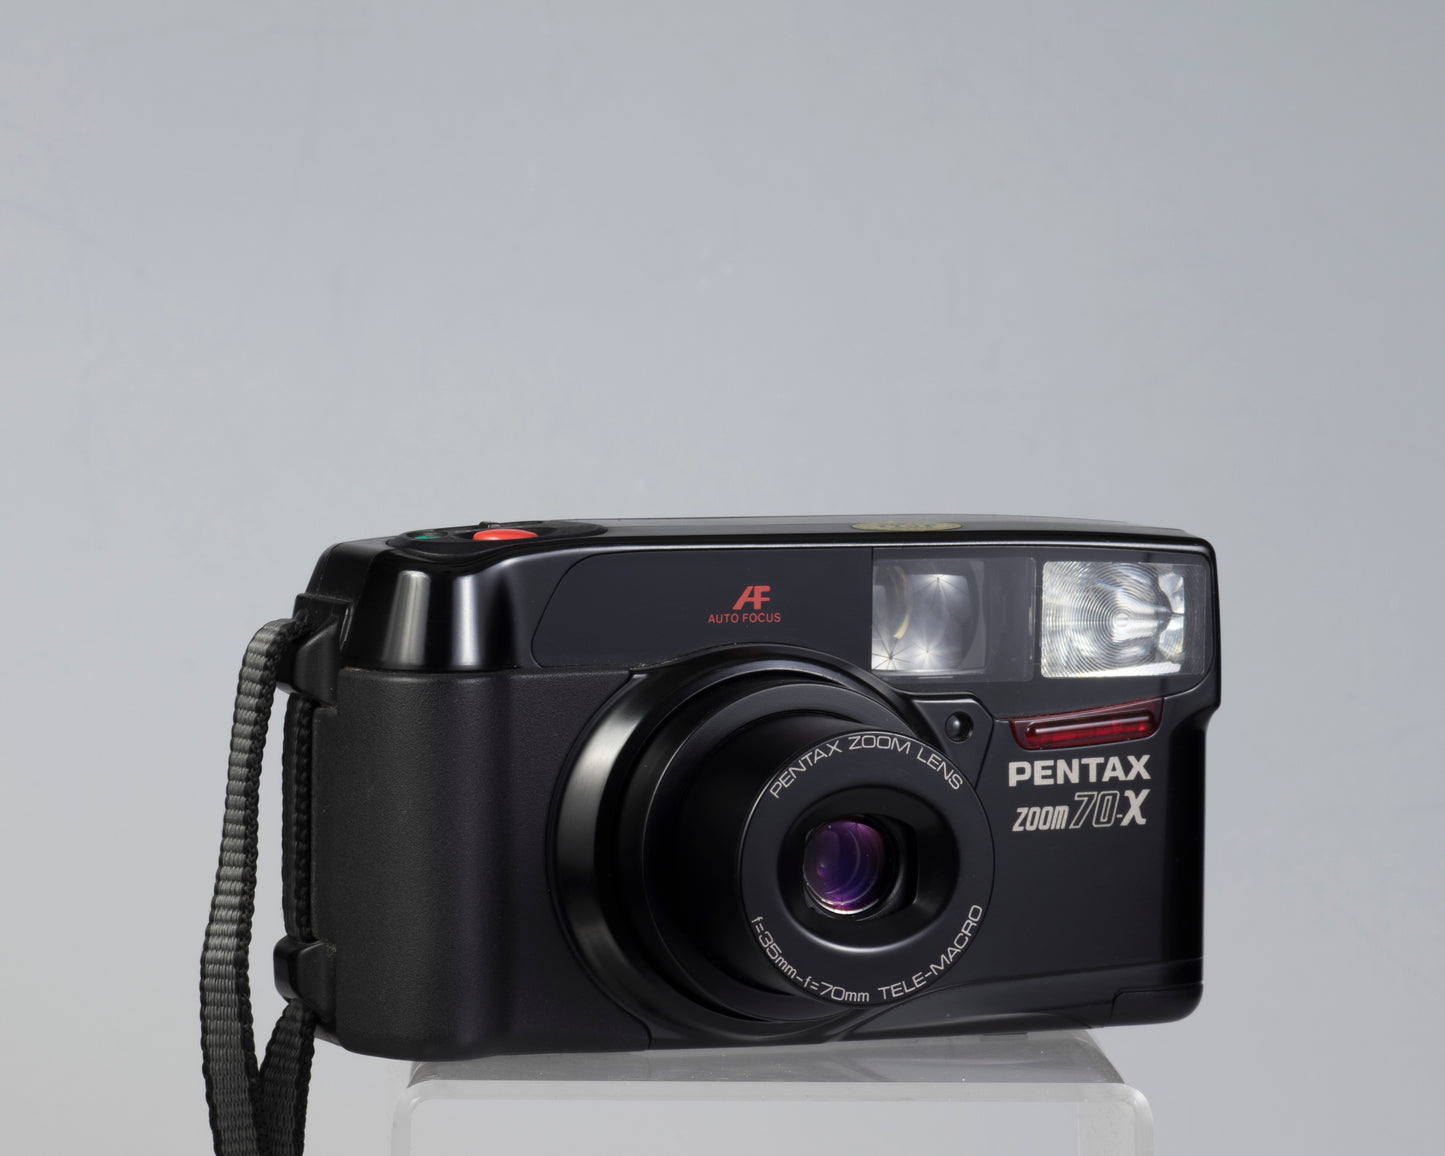 Pentax Zoom 70-X 35mm camera *LCD screen issues; otherwise works well* (serial 7813716)